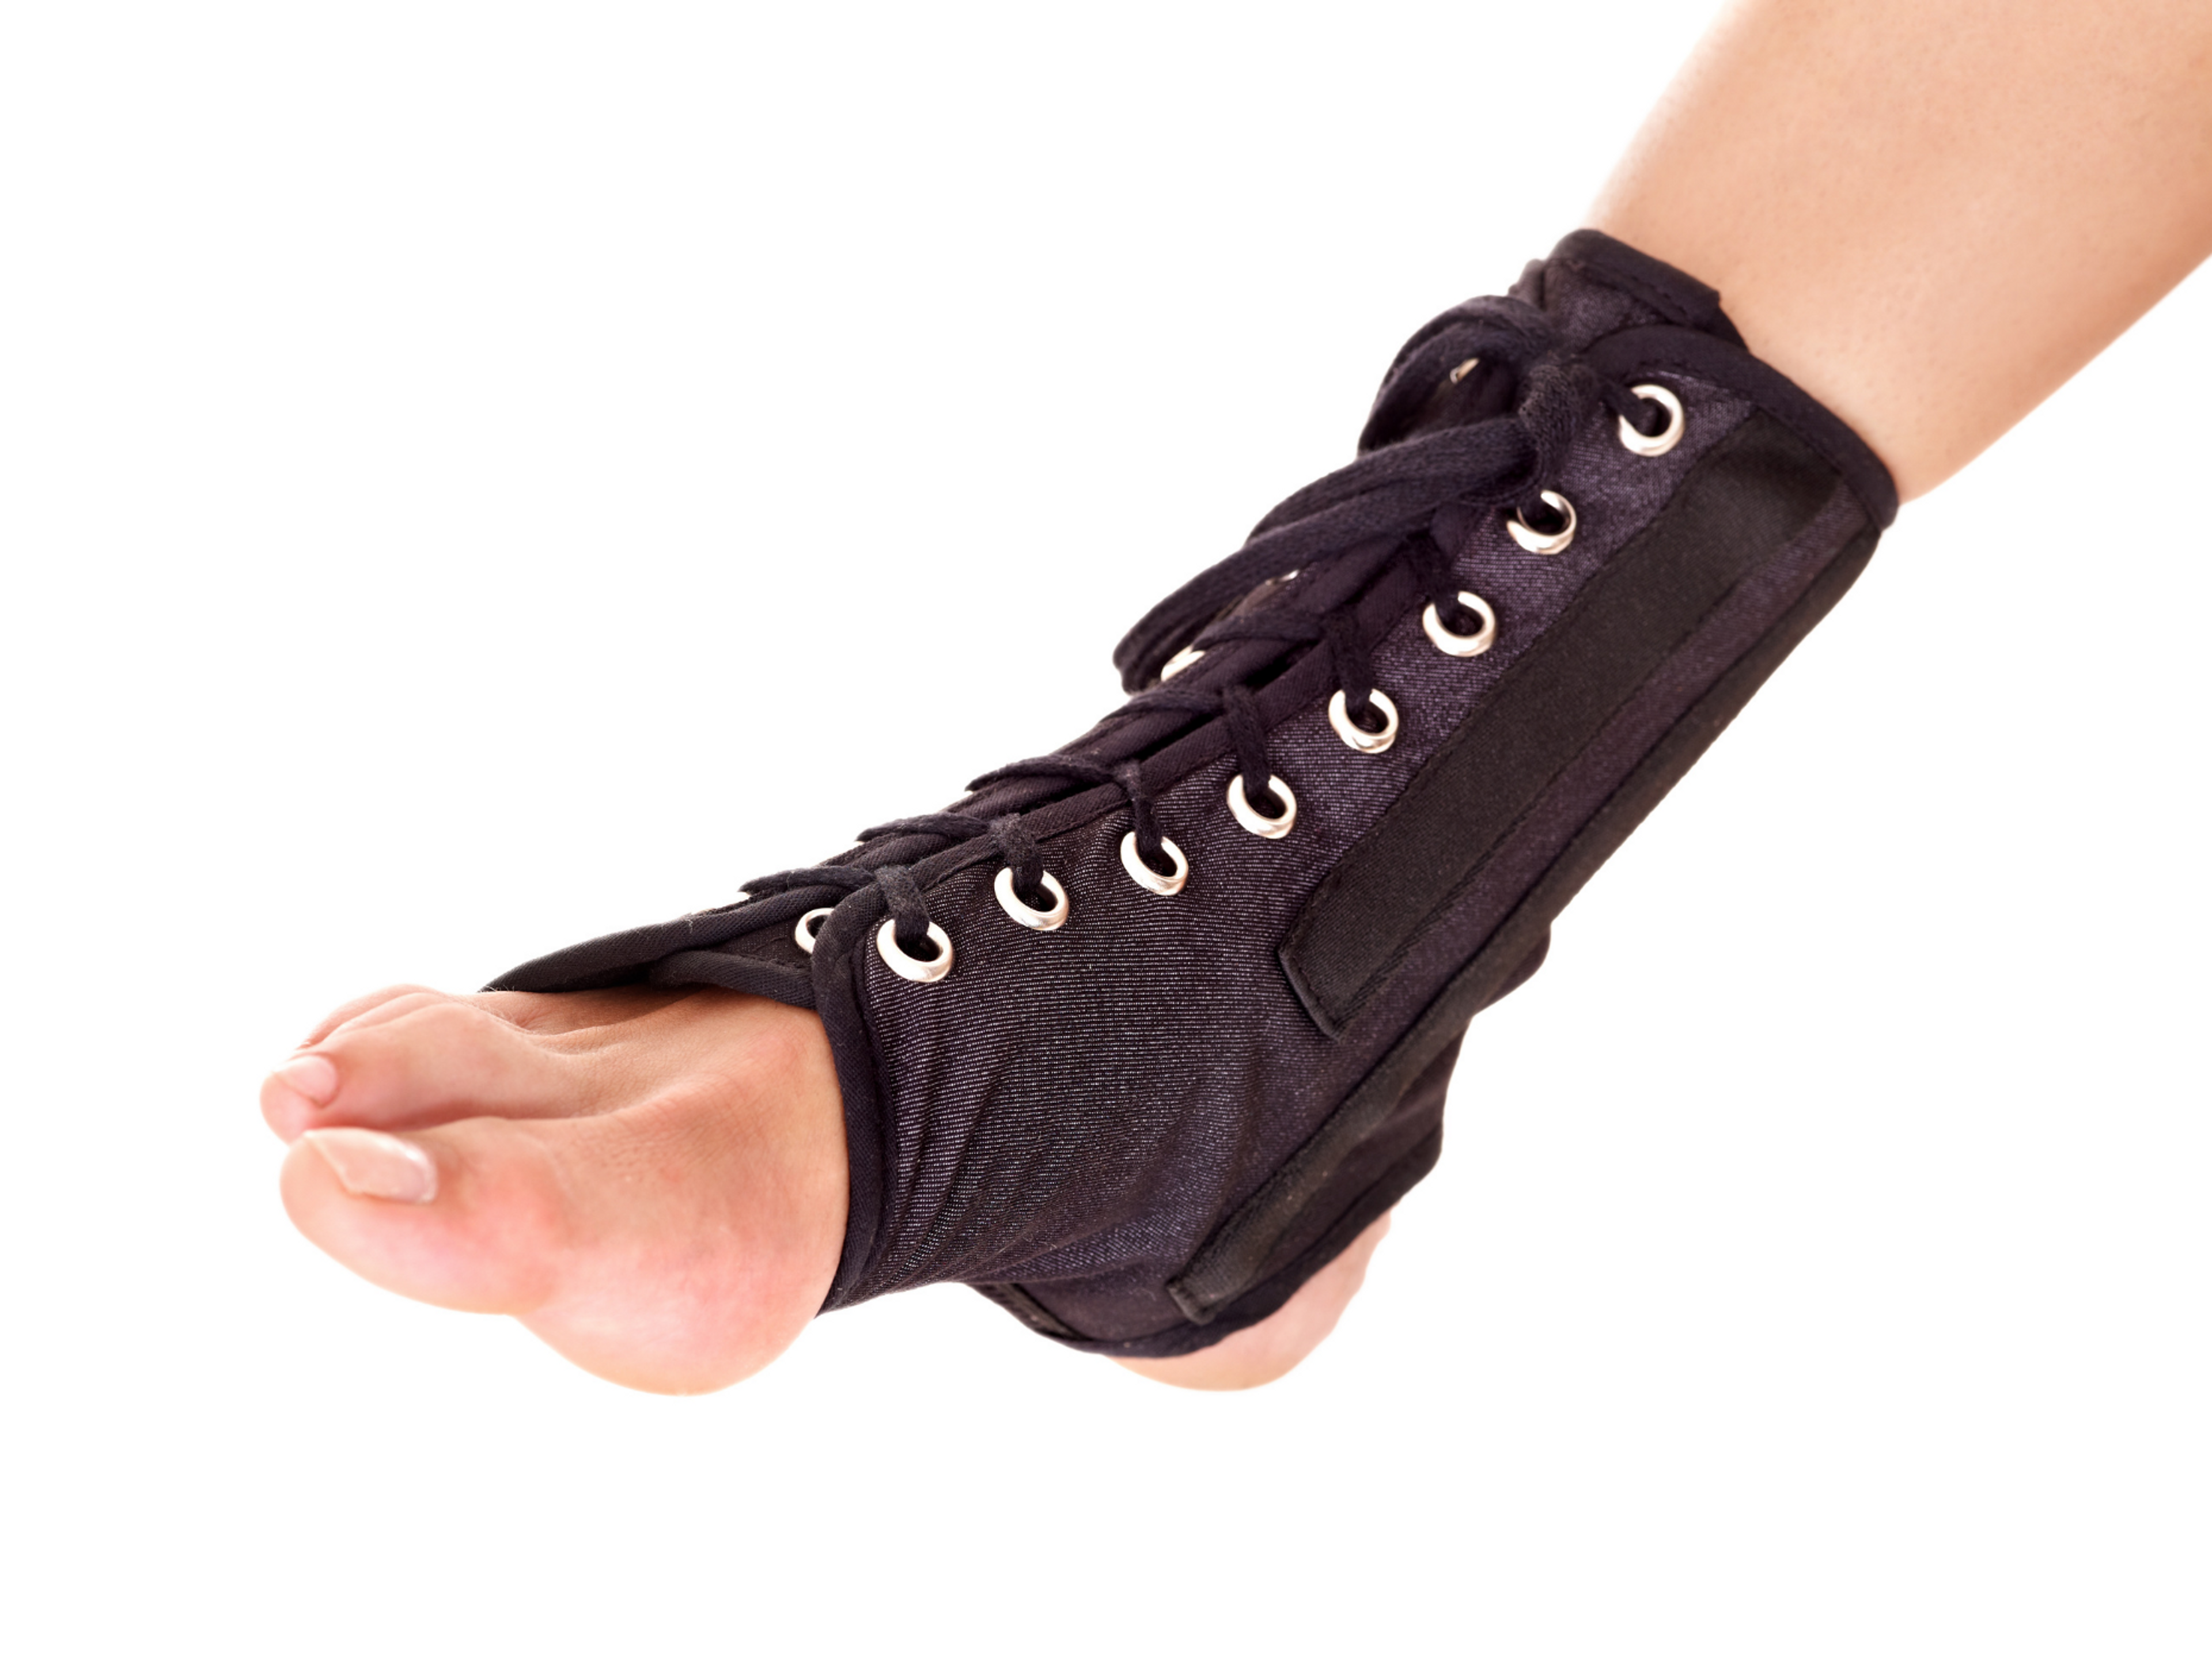 Example for semi-rigid ankle sprain brace. The offer good protection.